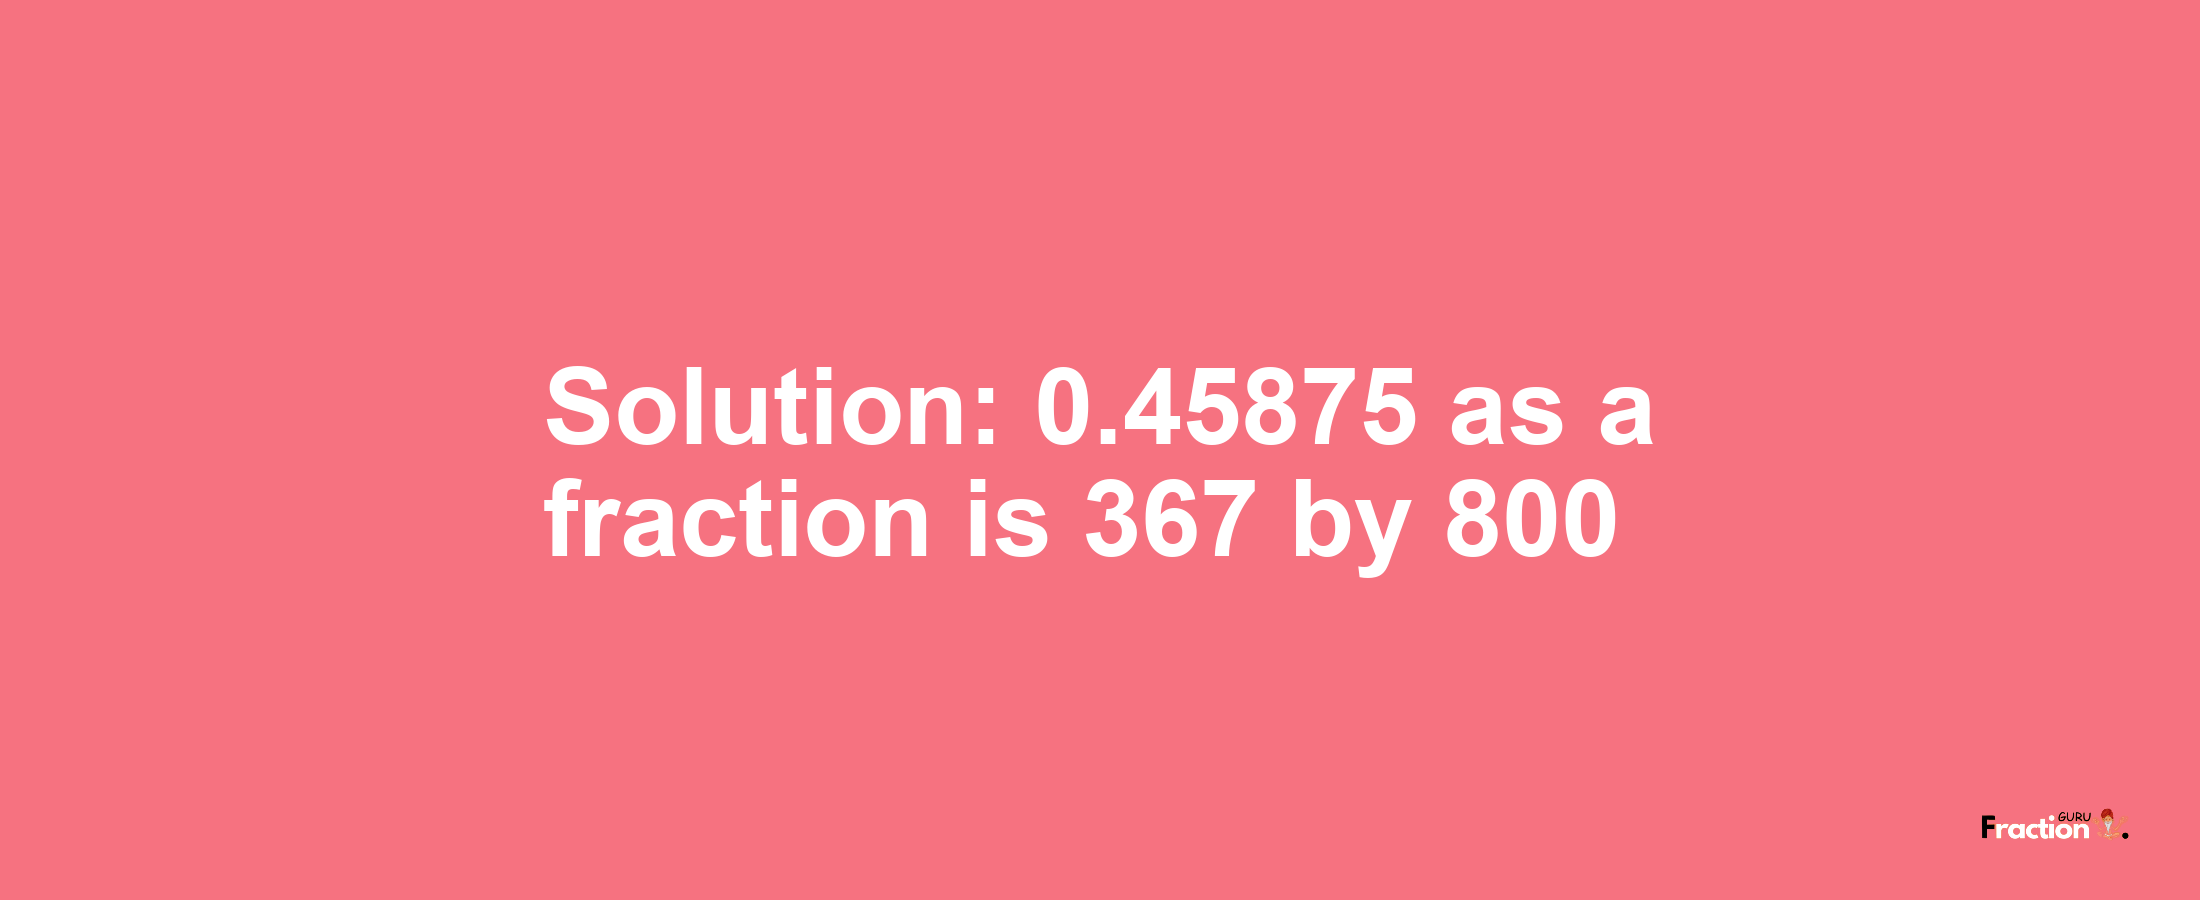 Solution:0.45875 as a fraction is 367/800